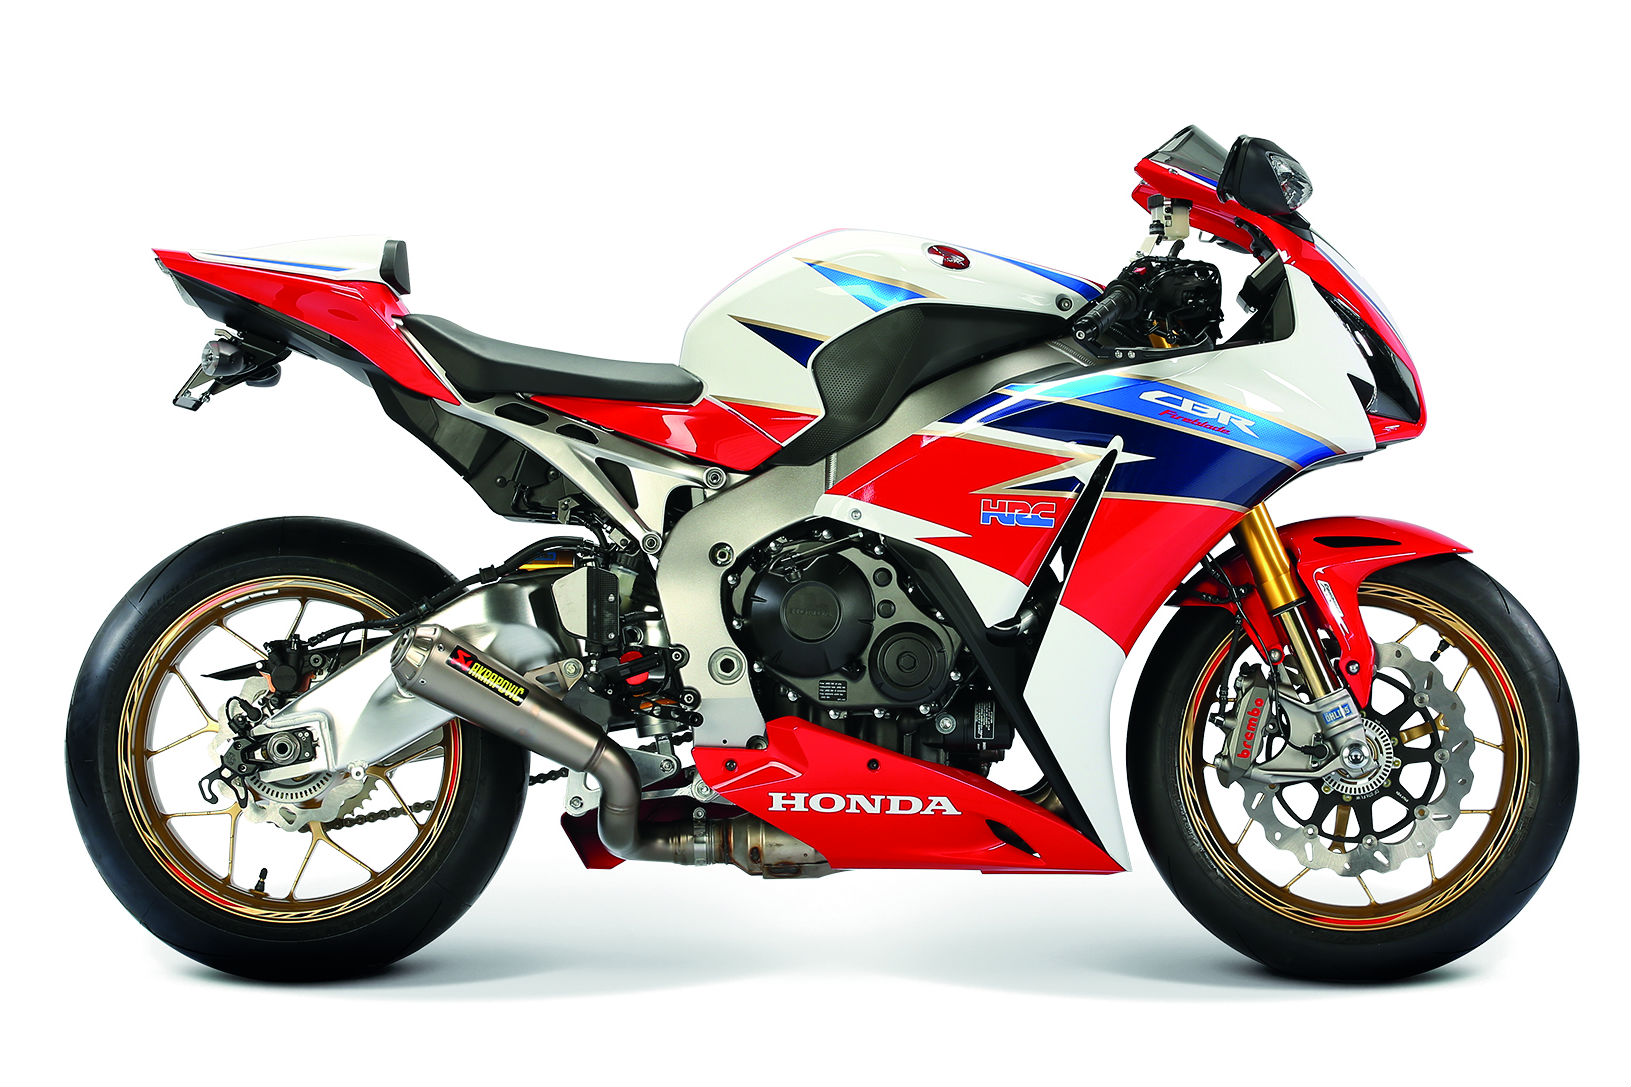 Two new special-edition Fireblades